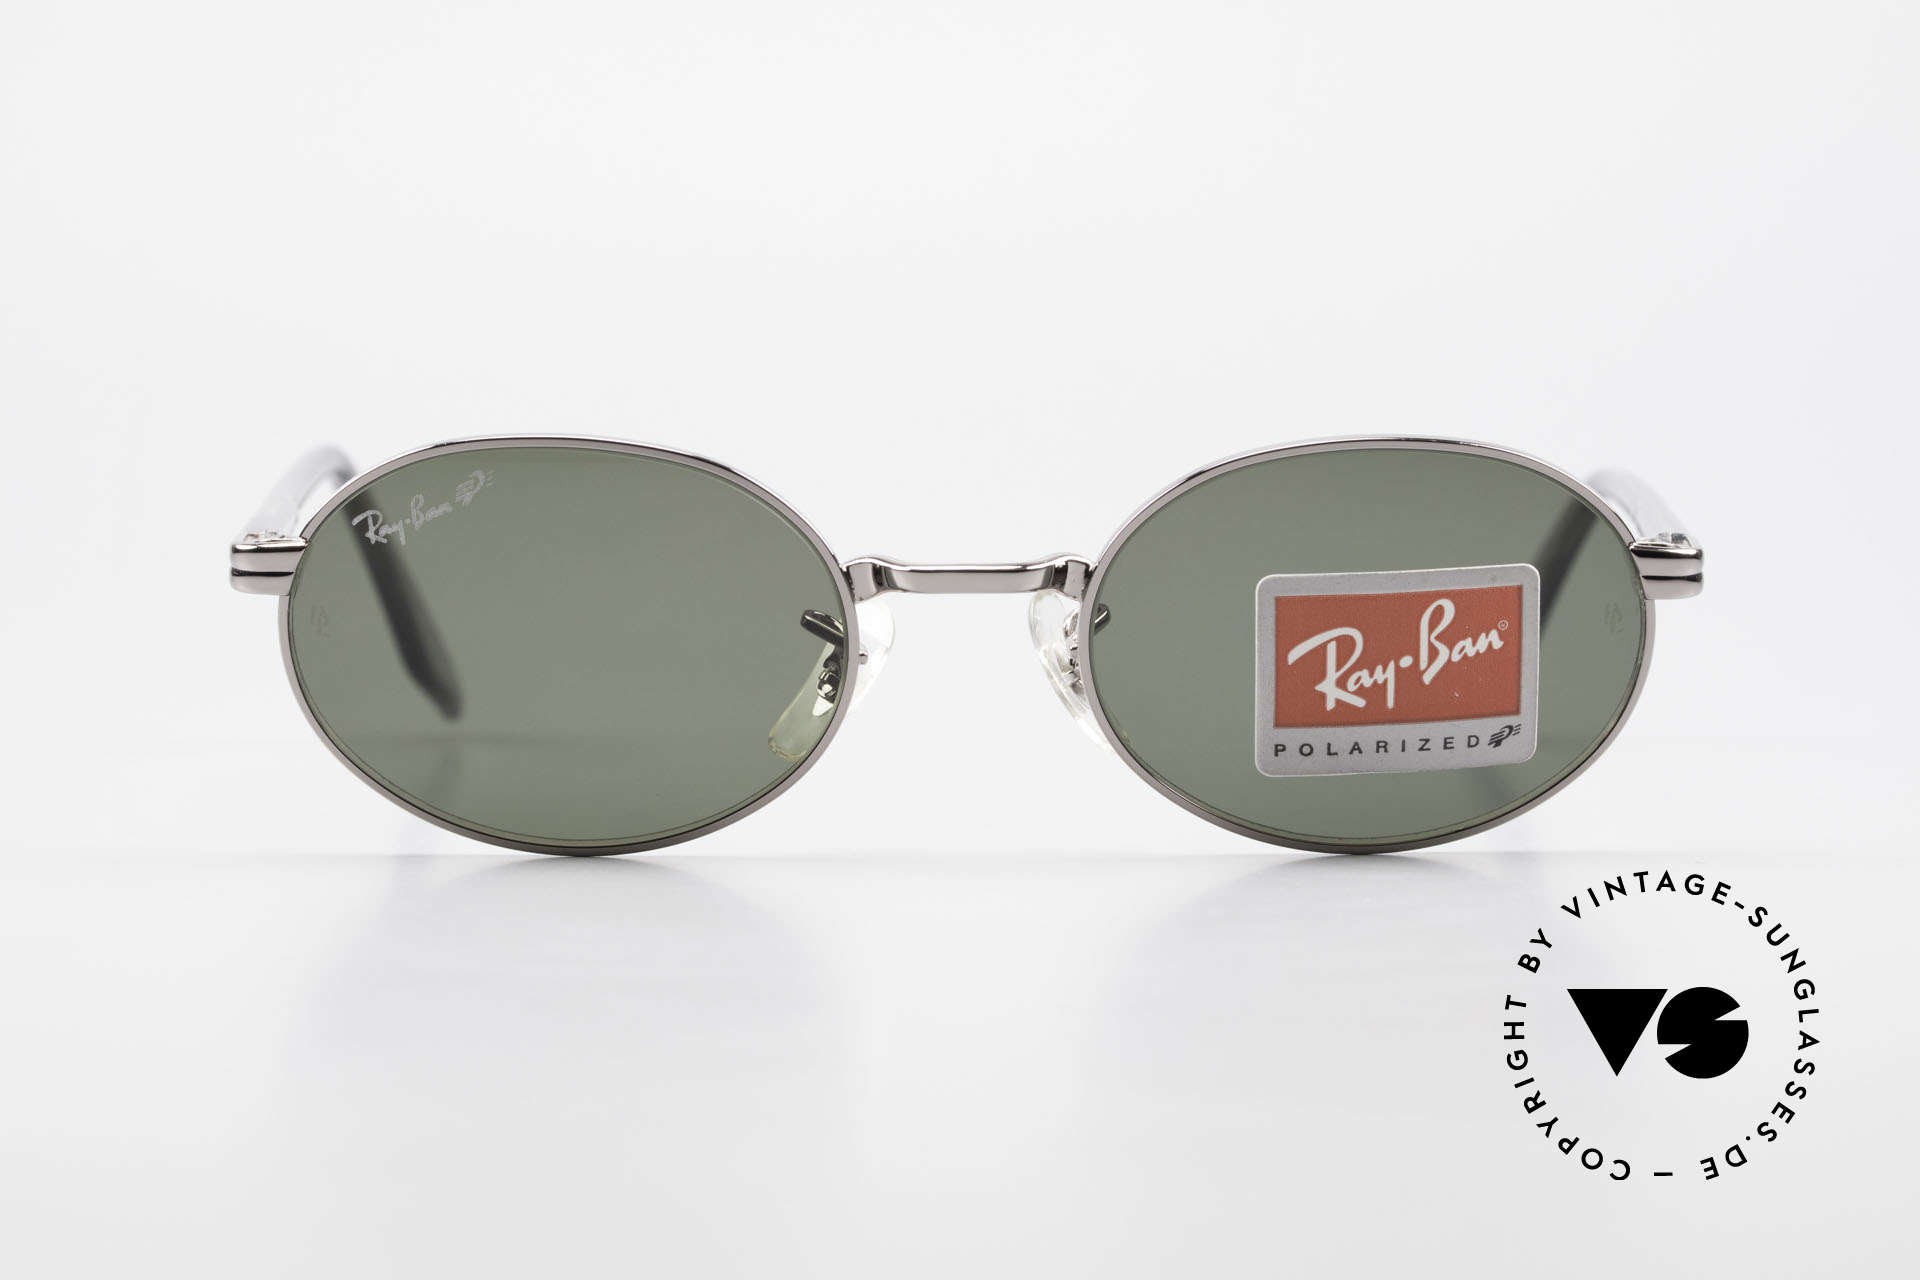 Ray Ban Sidestreet Diner Oval Polarized USA B&L Sunglasses, one of the last models made by Bausch&Lomb, U.S.A., Made for Men and Women